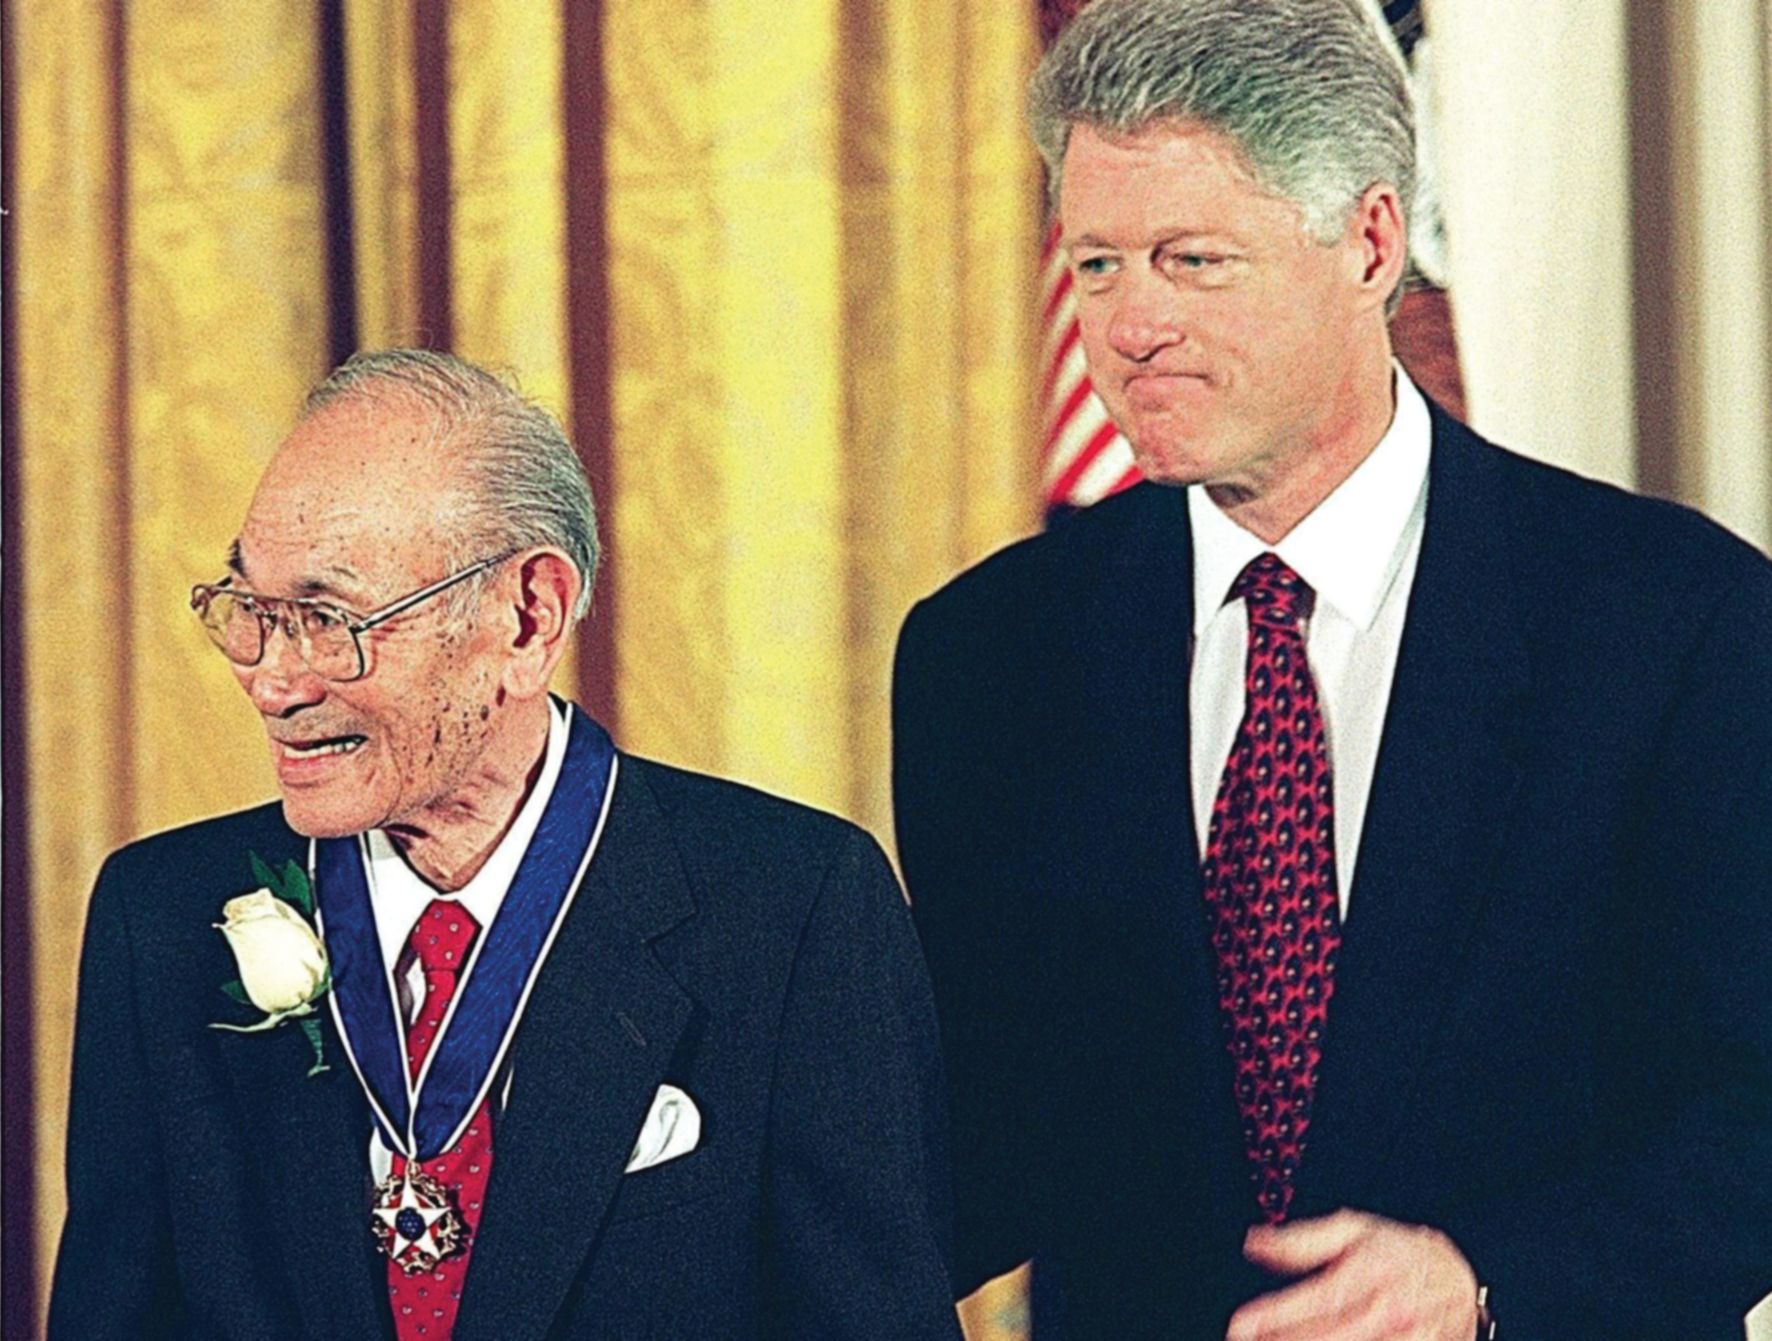 For his courageous stand against the injustice of wartime internment of Japanese-American citizens, Fred Korematsu received the Presidential Medal of Freedom, the highest civilian recognition given on behalf of the U.S. government, from President Bill Clinton in 1998.